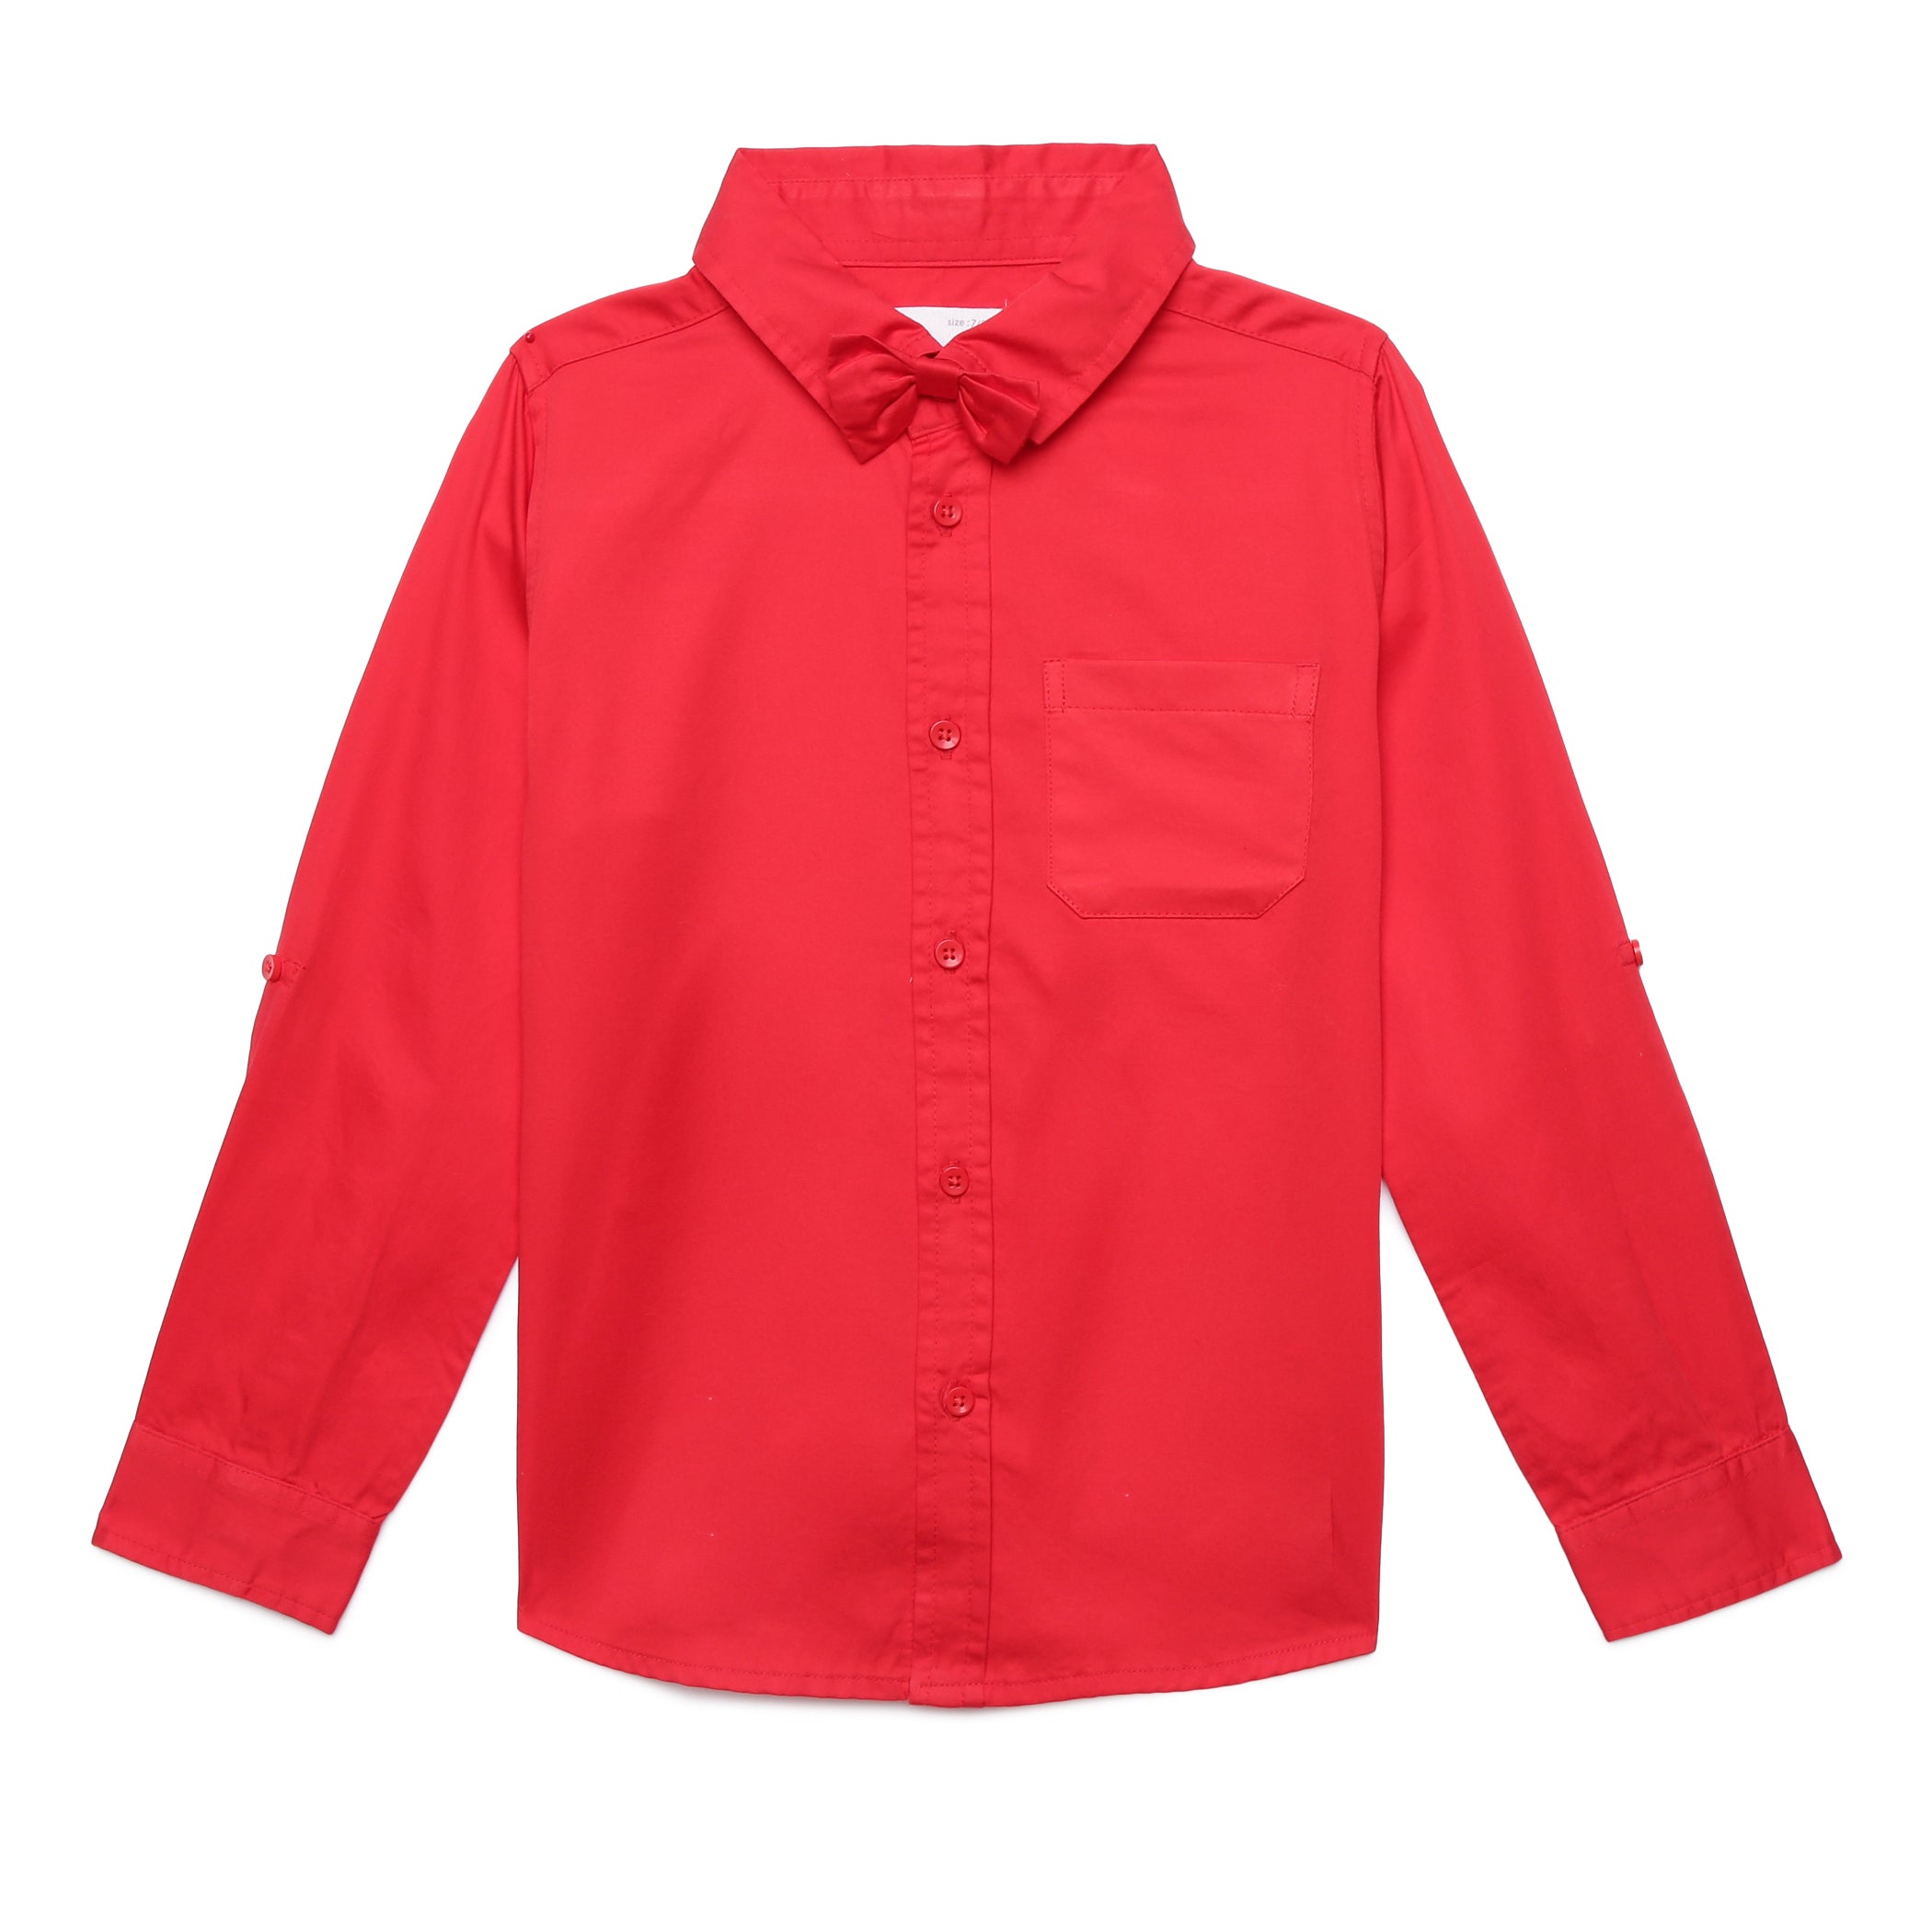 Kid Boys Collar Neck Roll up Sleeve Shirt with Bow Tie